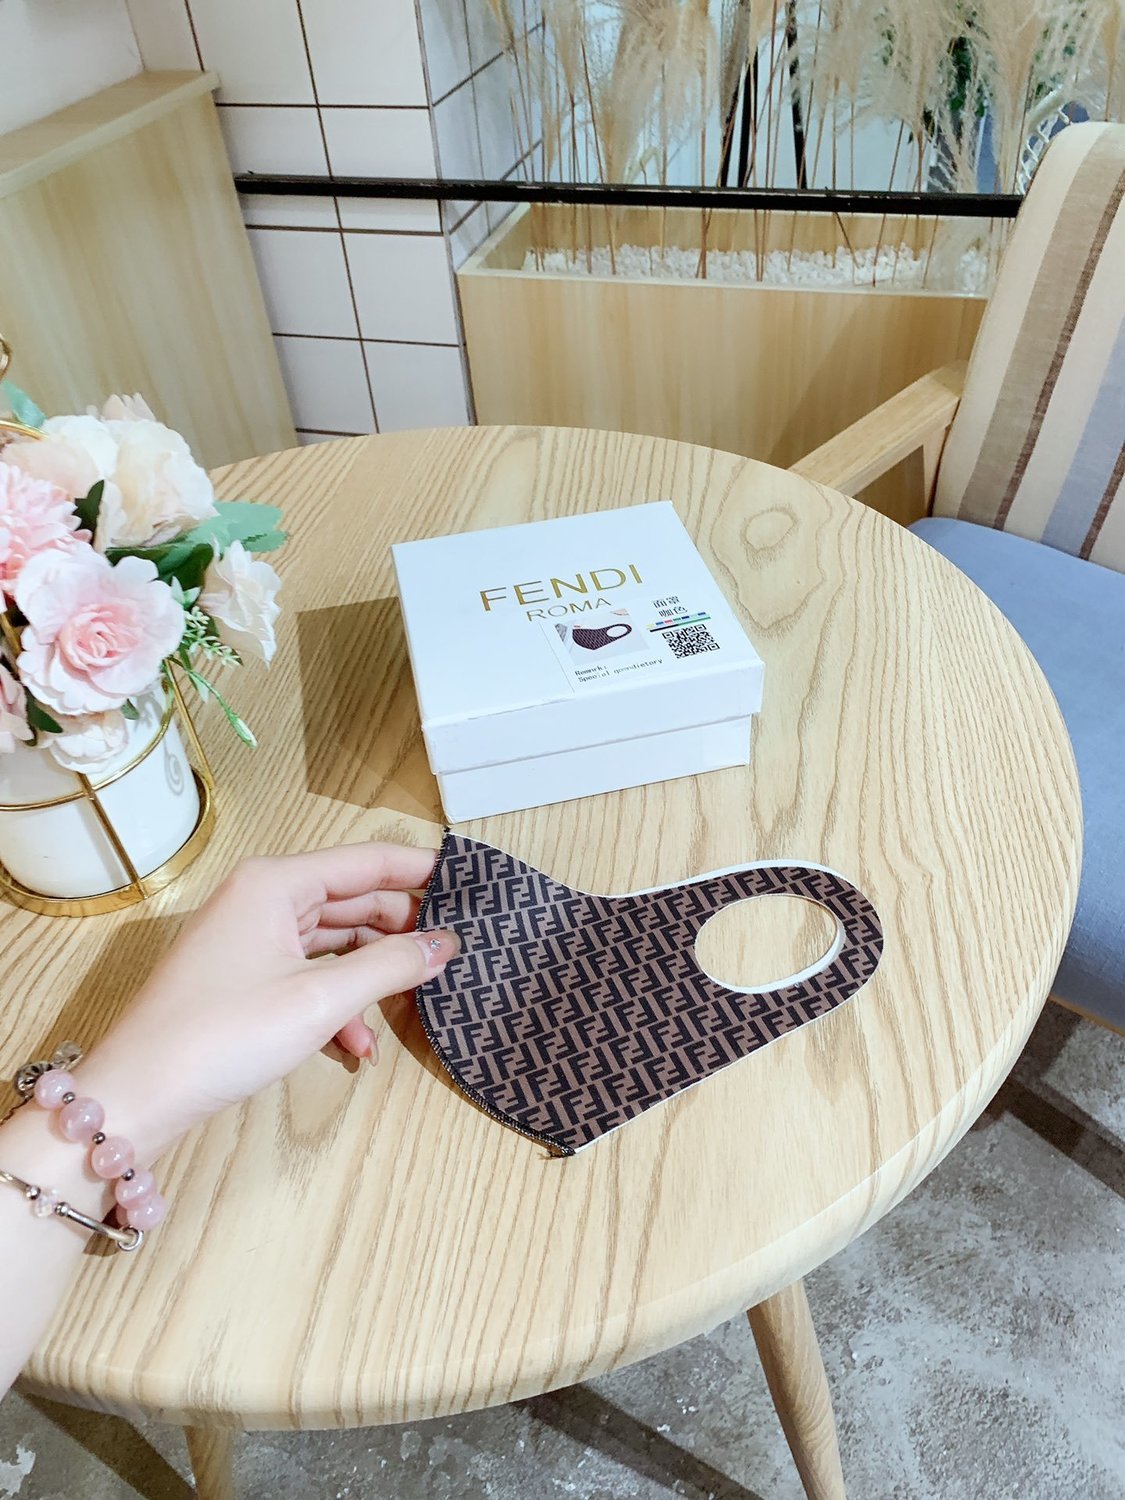 Louis Vuitton Face Mask – Teelooker – Limited And Trending